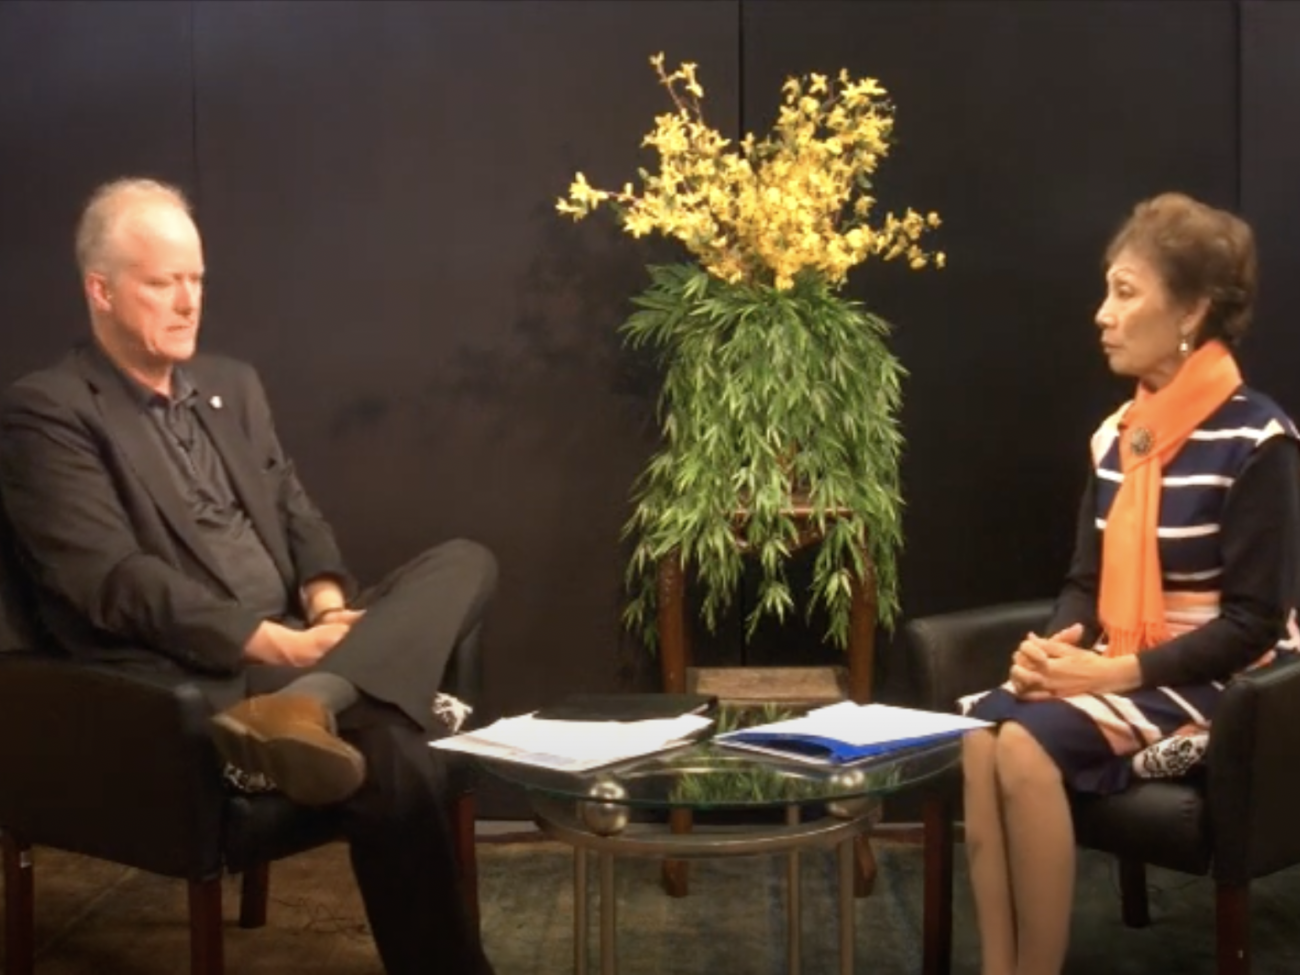 Community Forum with guest, James Cooper - Vallejo Community Access Television